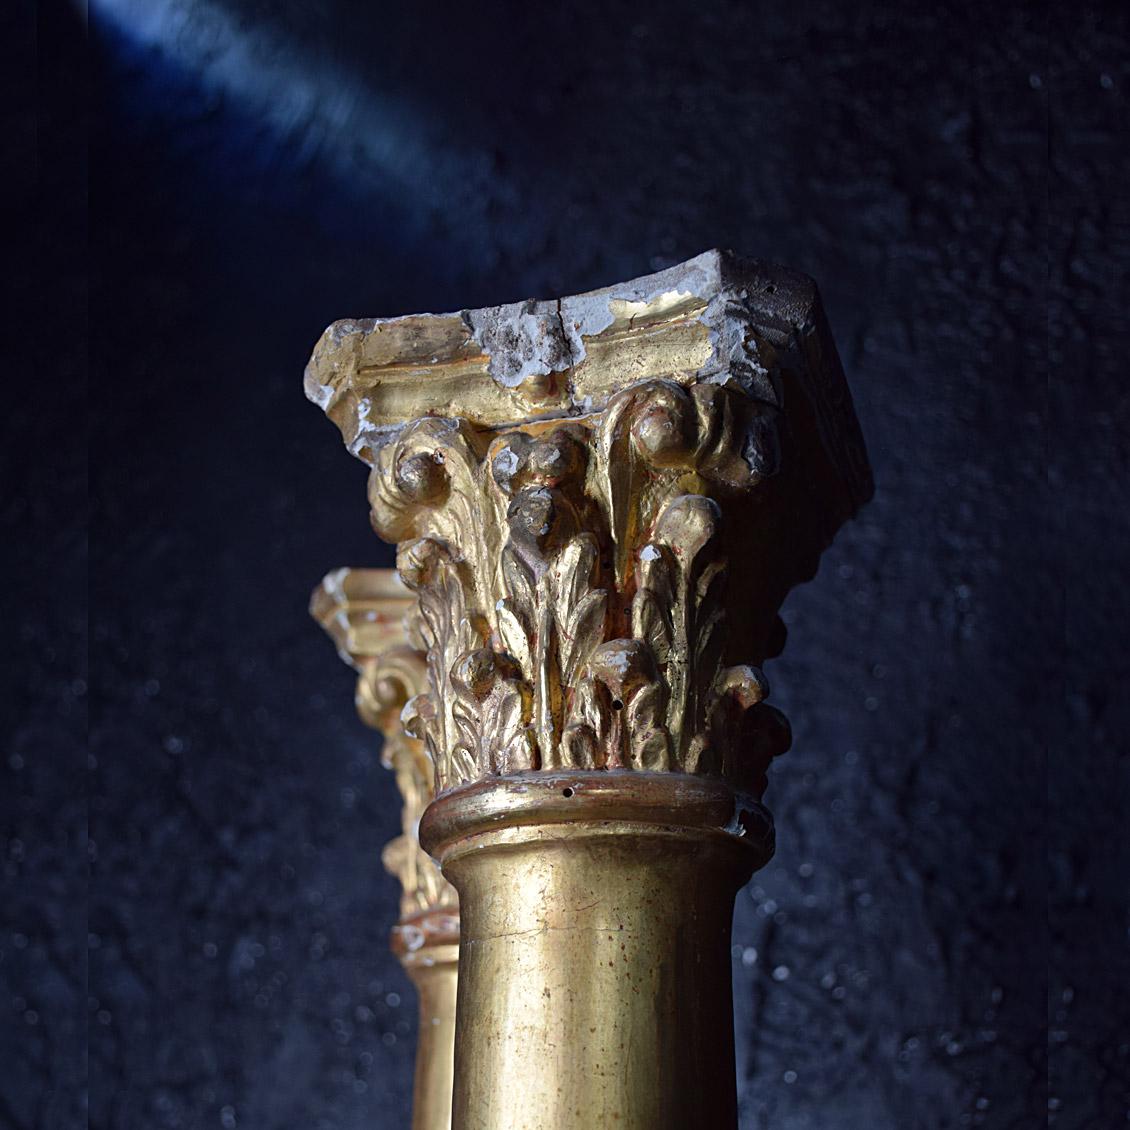 Early 19th century Italian pillars
We are proud to offer a highly decorative pair of early 19th century Italian pillars. Made from hand carved pine, hand-crafted gesso and painted in a rich gold gild finish. Unusual due to their size but able to